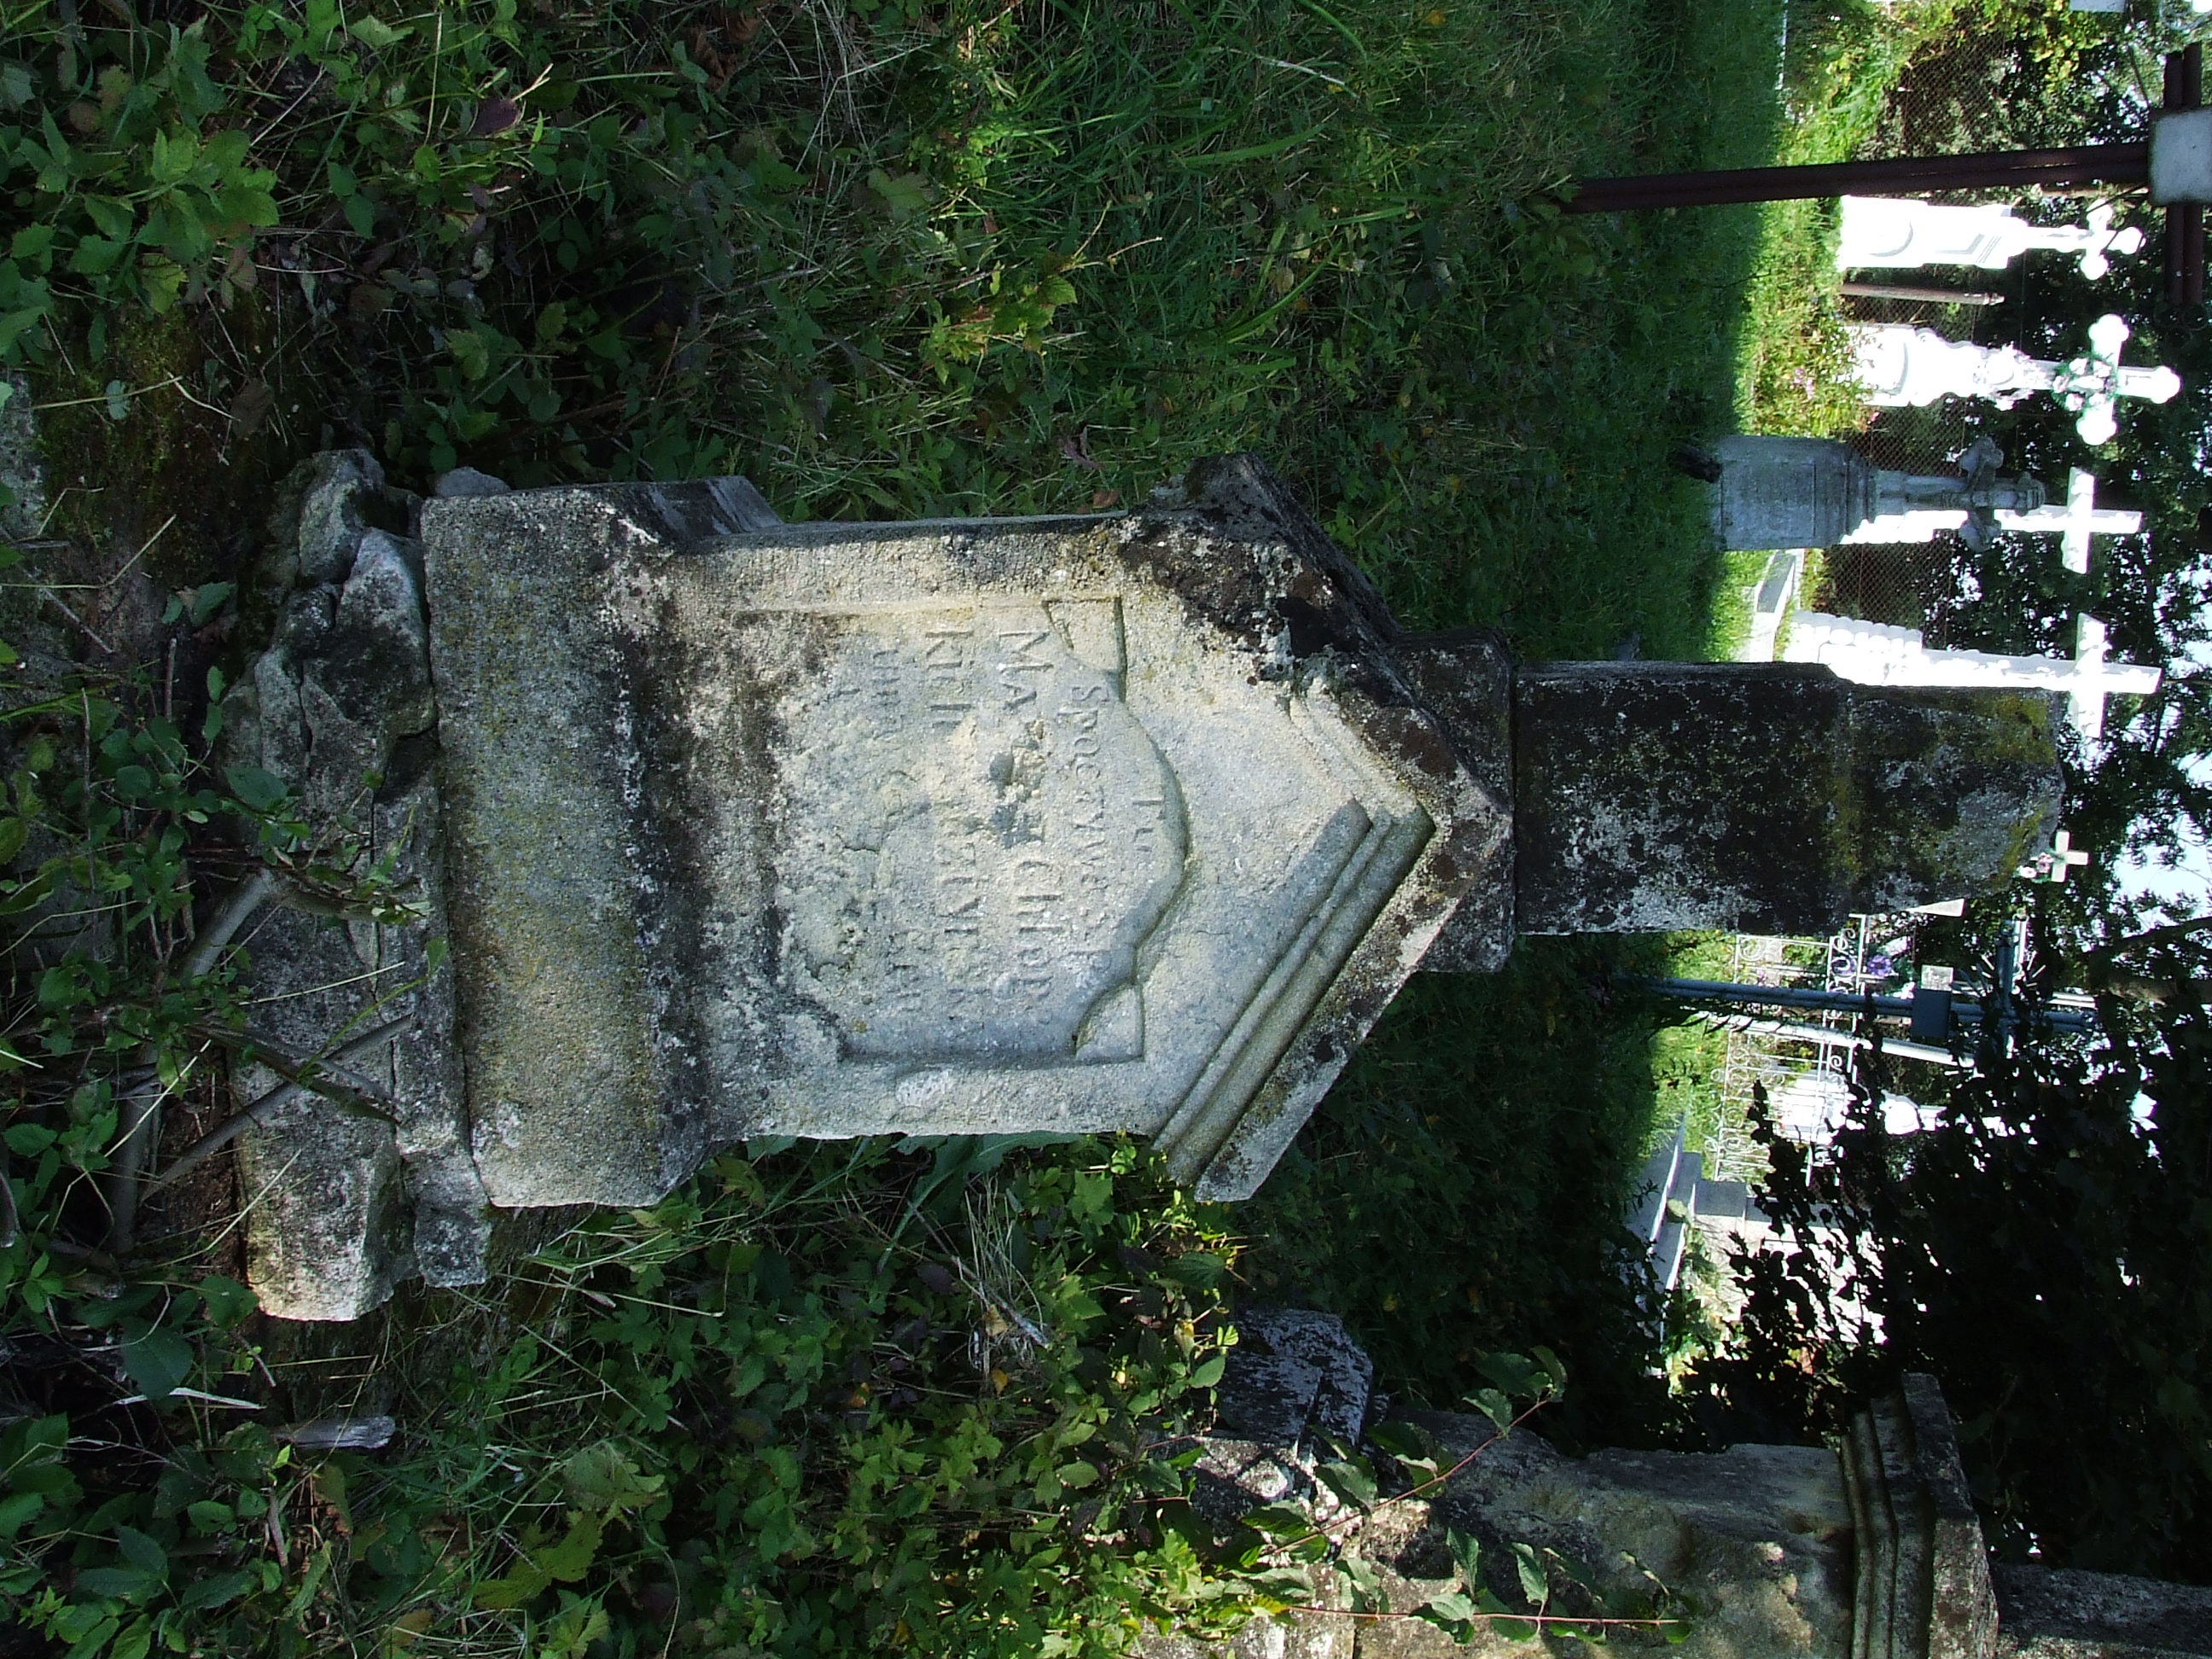 Tombstone of Maria [...]cztynska, cemetery in Barysh, as of 2006.